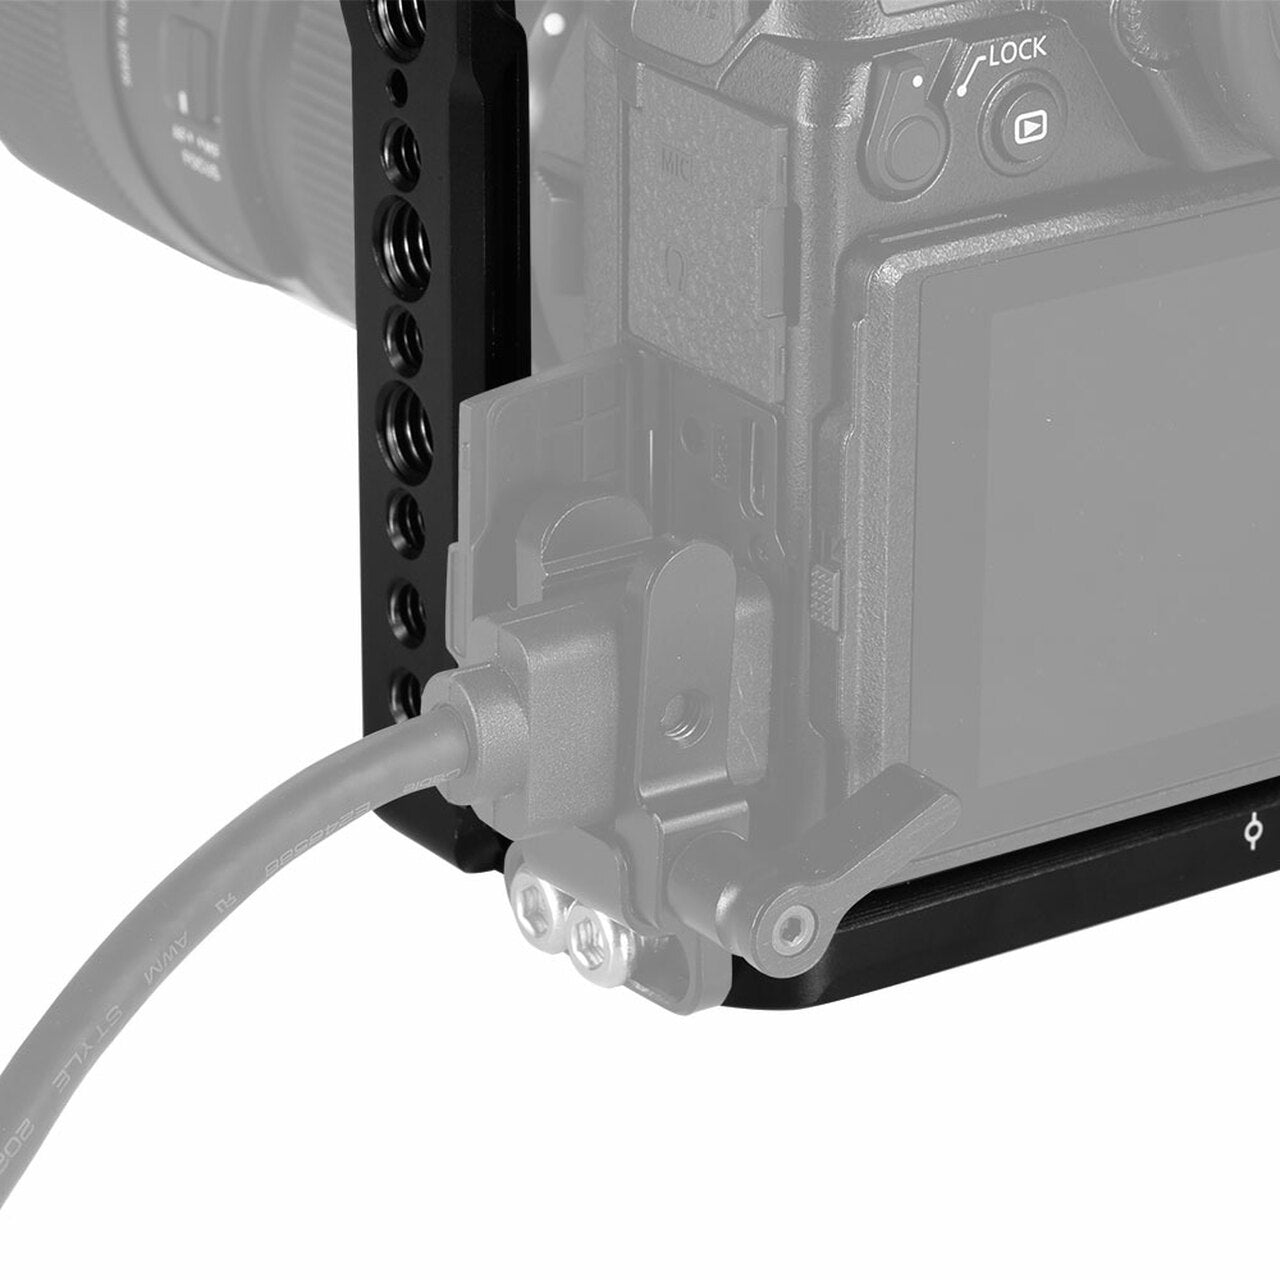 SmallRig Camera Cage for Panasonic Lumix DC-S1 and S1R with NATO Rail Cold Shoe Strap Slots CCP2345